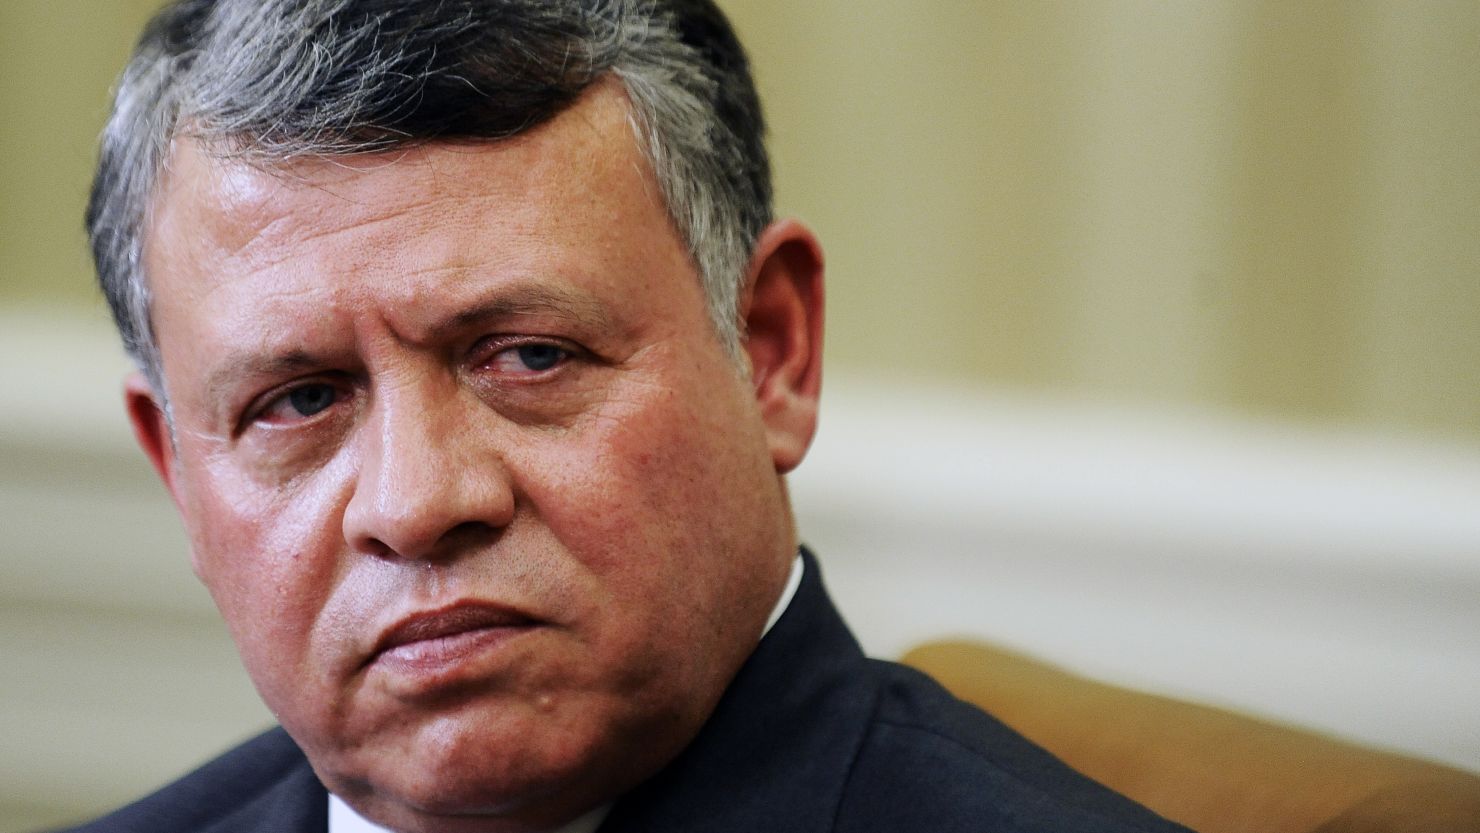 Jordan's King Abdullah was "concerned" by the allegations, according to an official